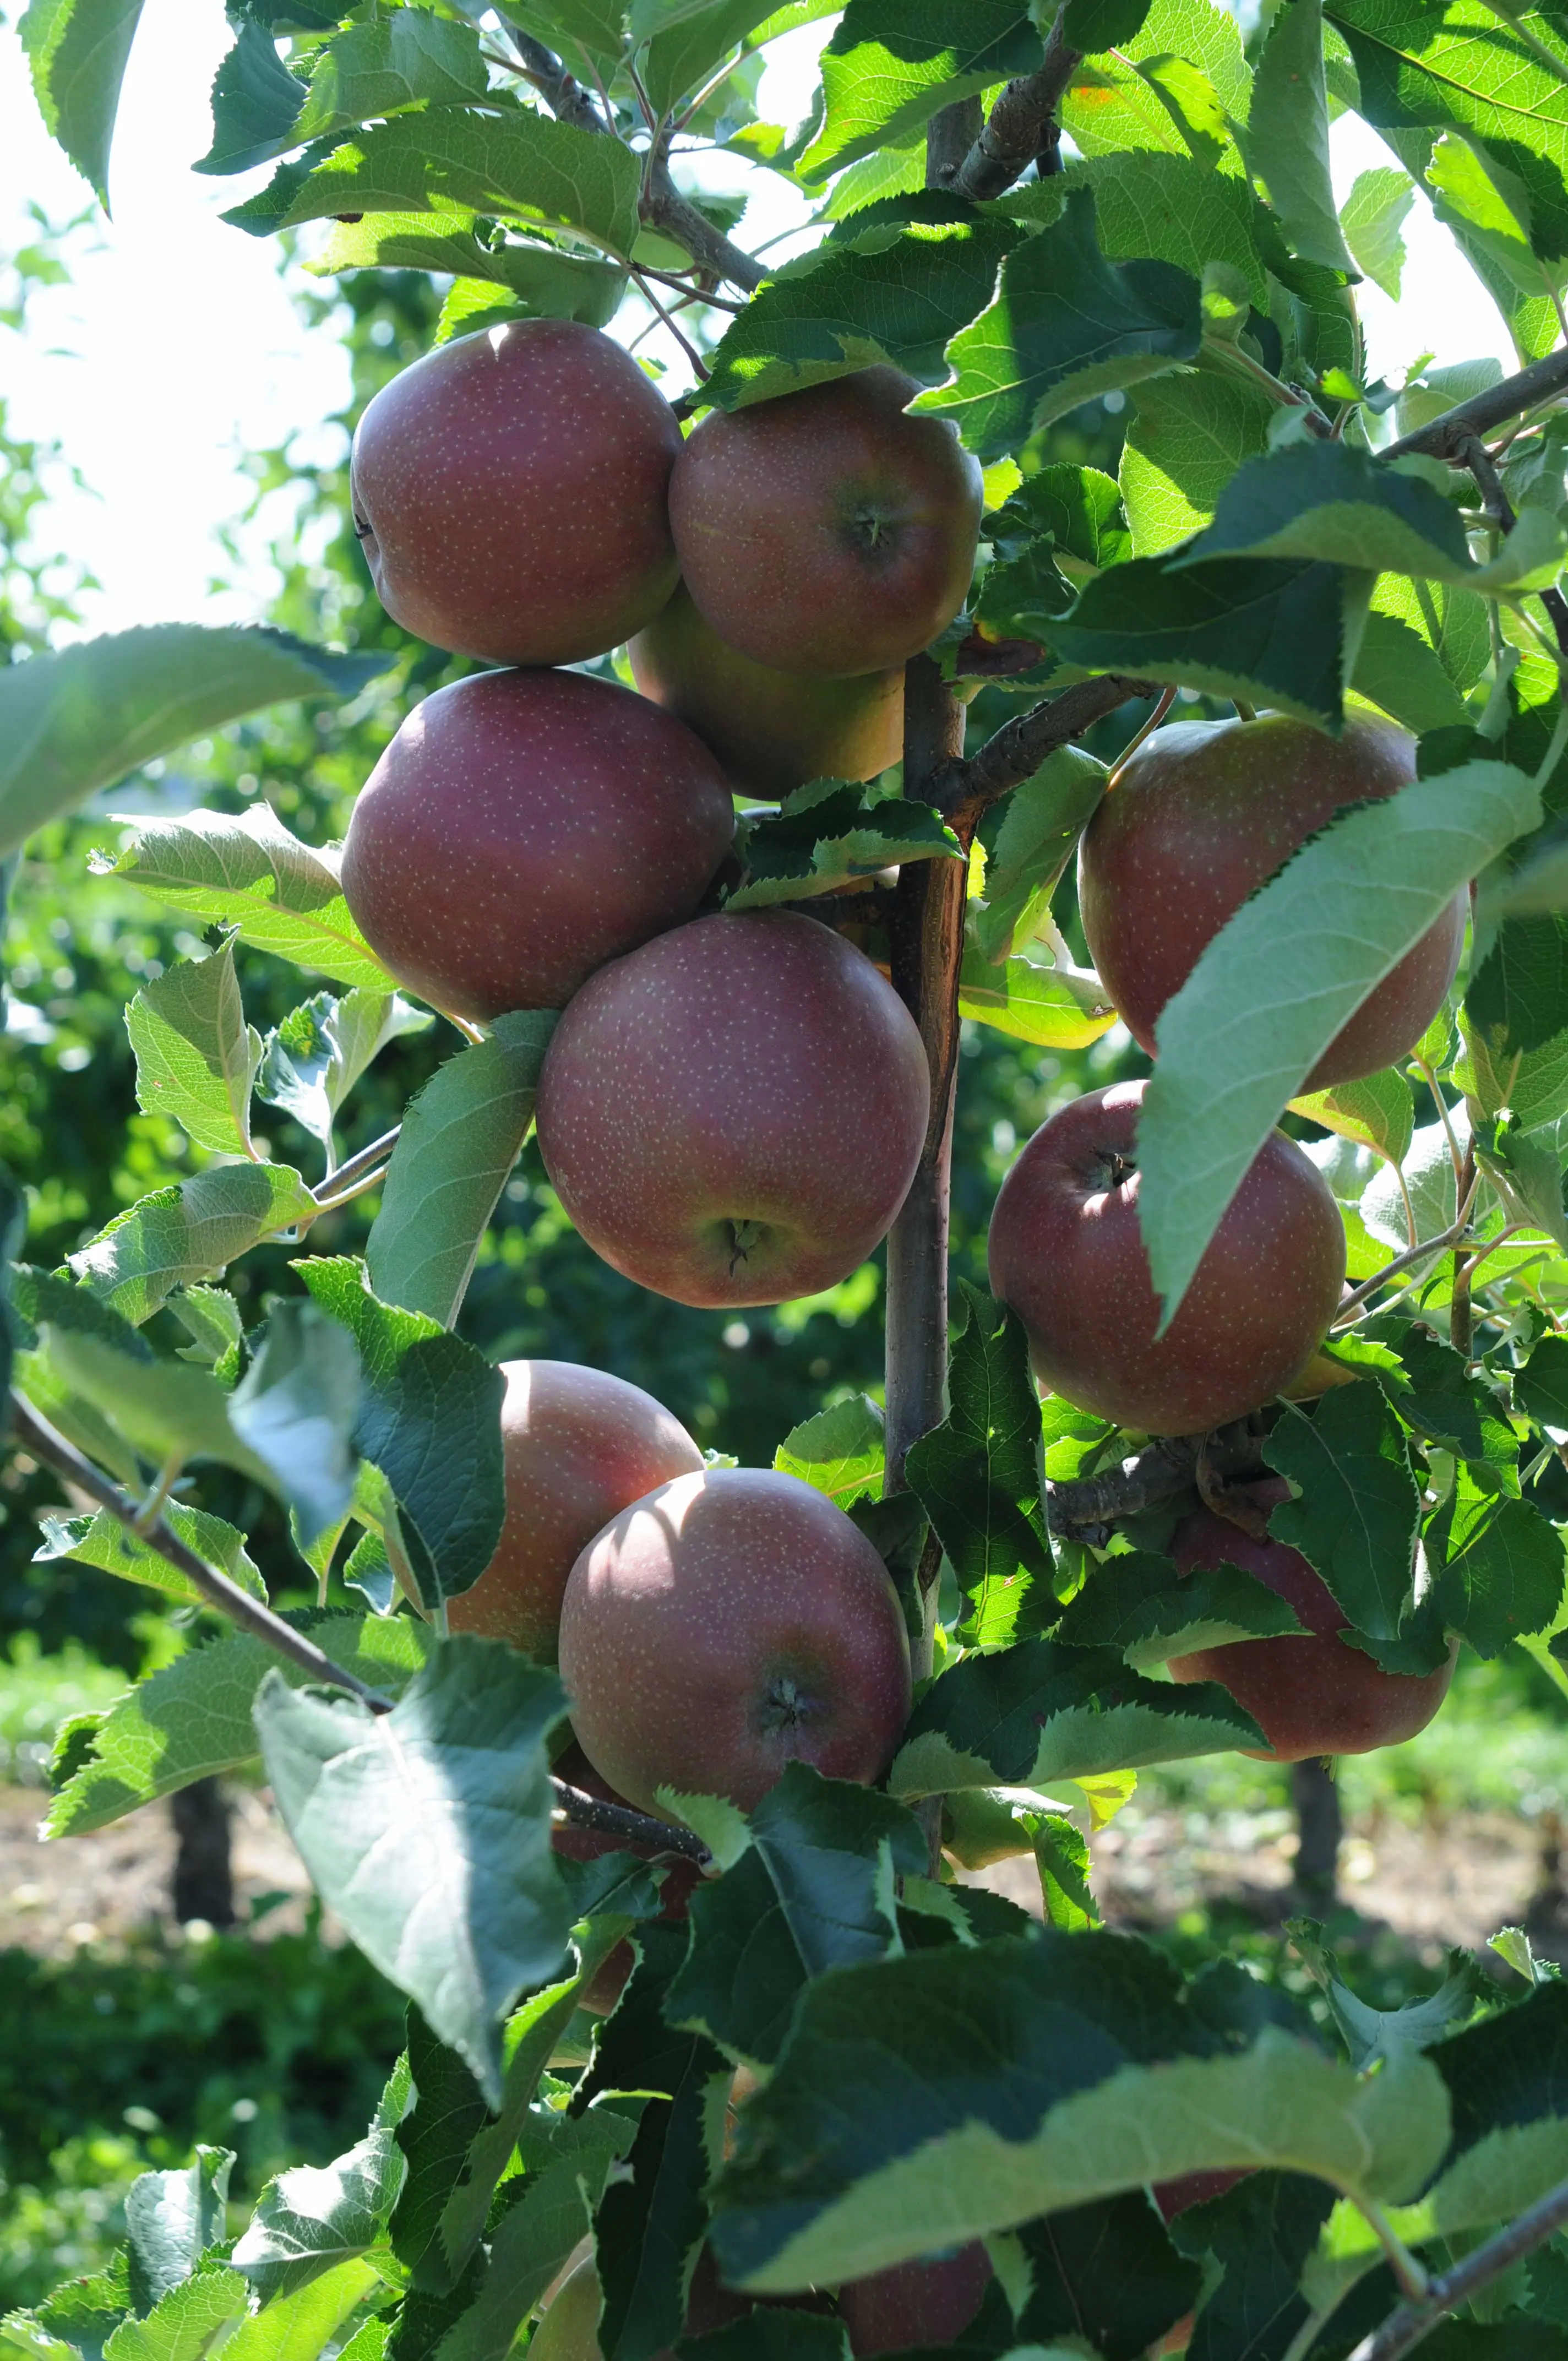 Fresh apples shortly before being picked